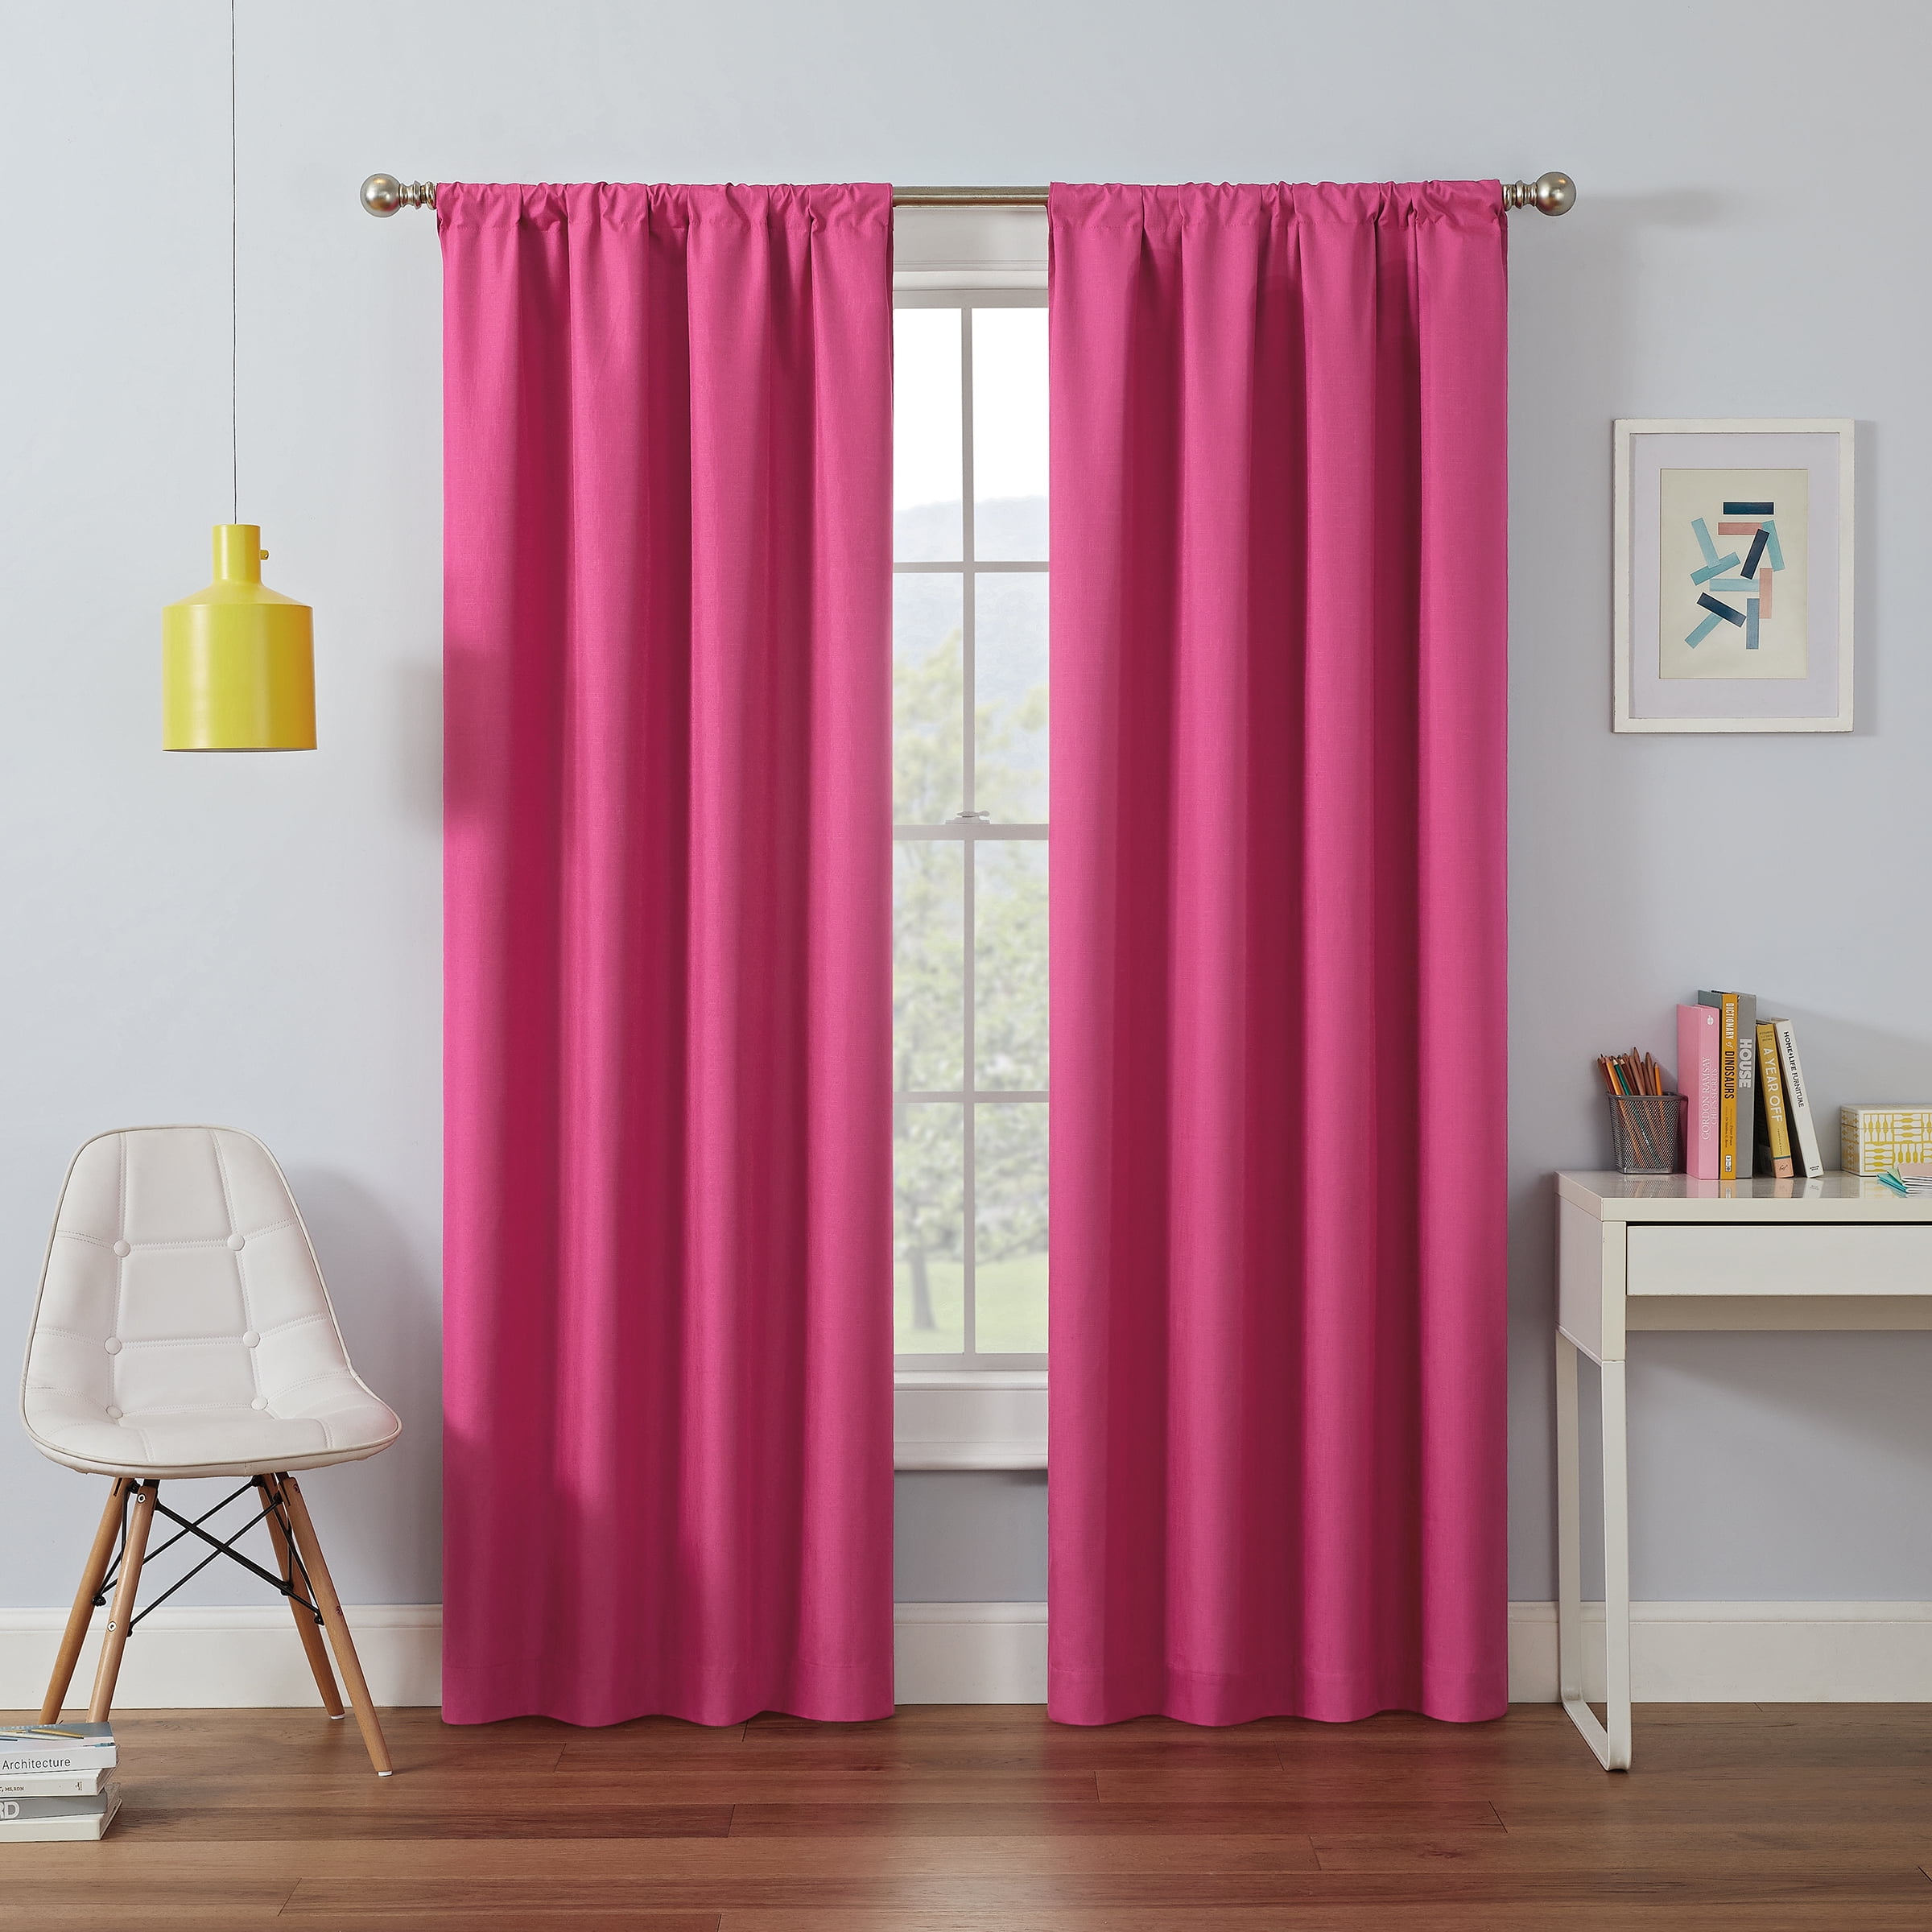 Kendall Raspberry Panel 42 x 84 Eclipse Curtain Energy Efficient NEW 